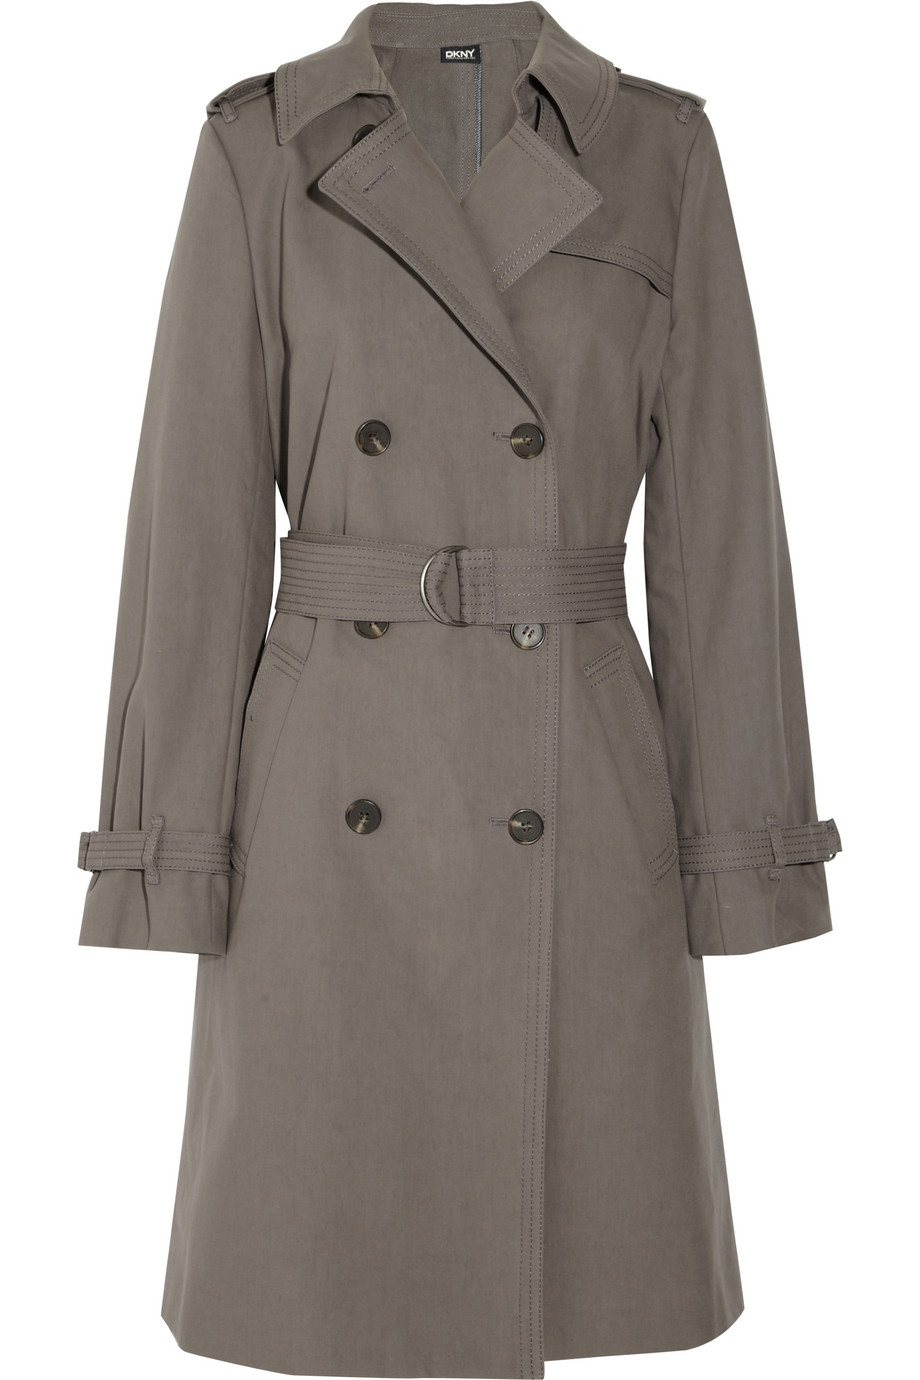 Dkny Cotton-twill Trench Coat in Gray | Lyst